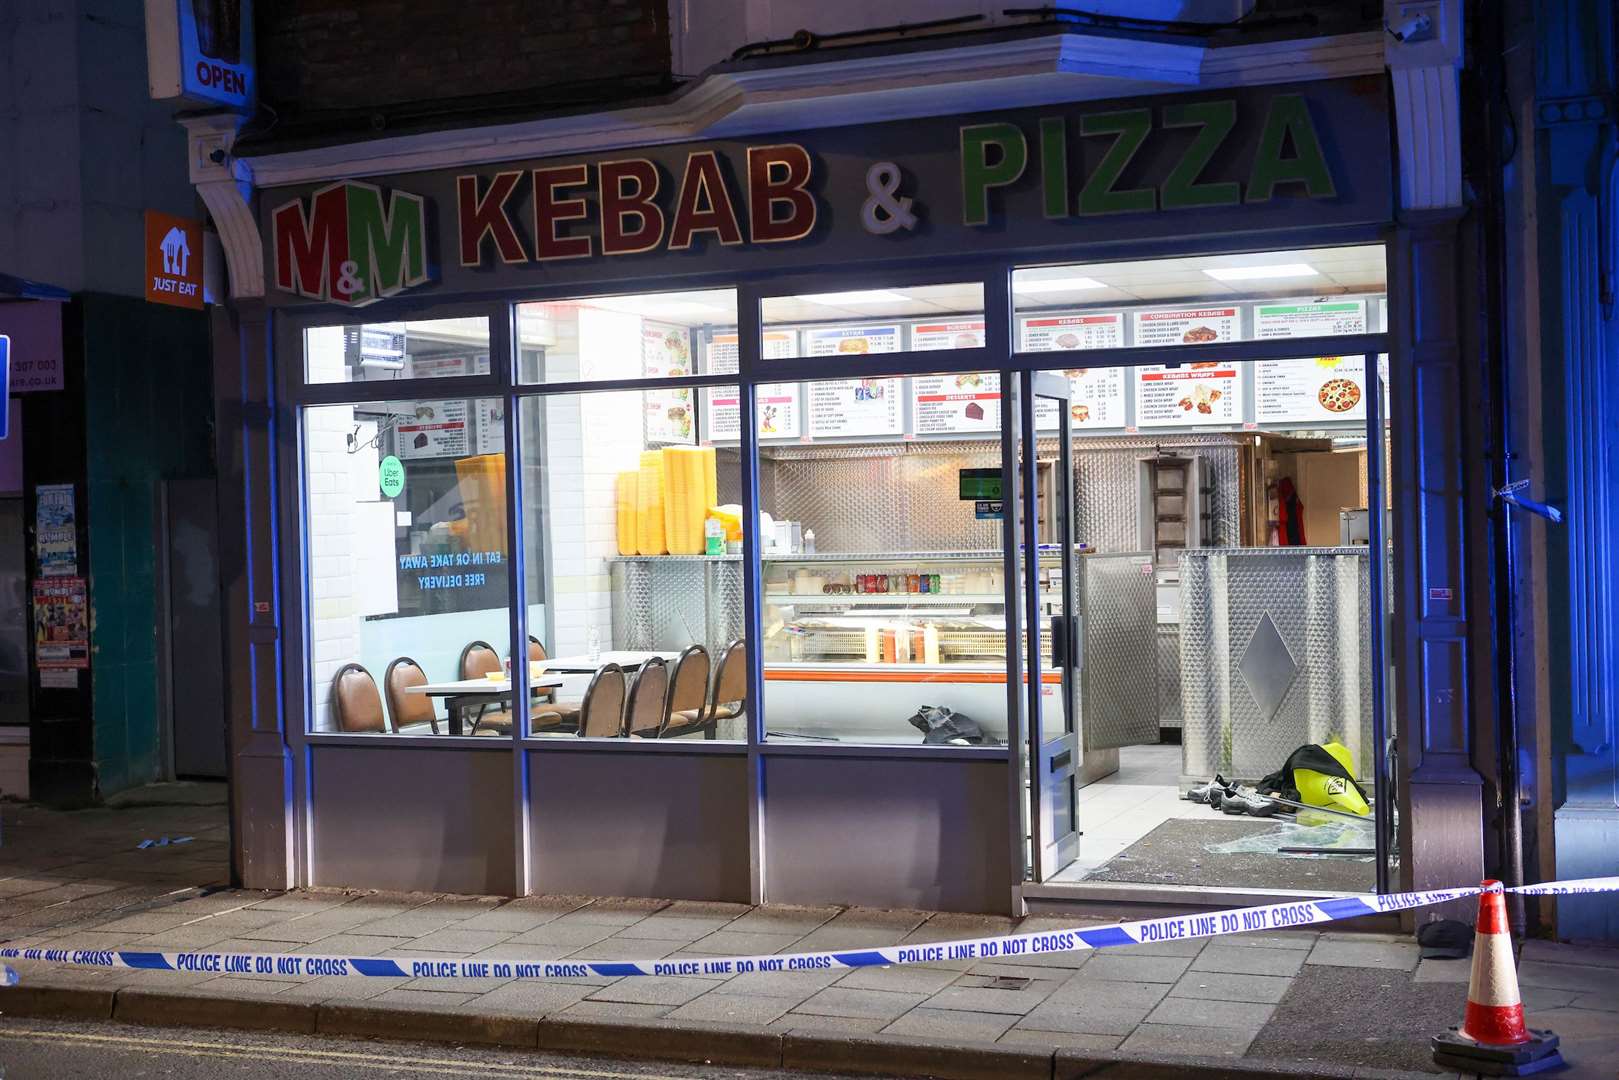 The violence unfolded at the M&M Kebab and Pizza shop in King Street, Ramsgate. Picture: UKNIP